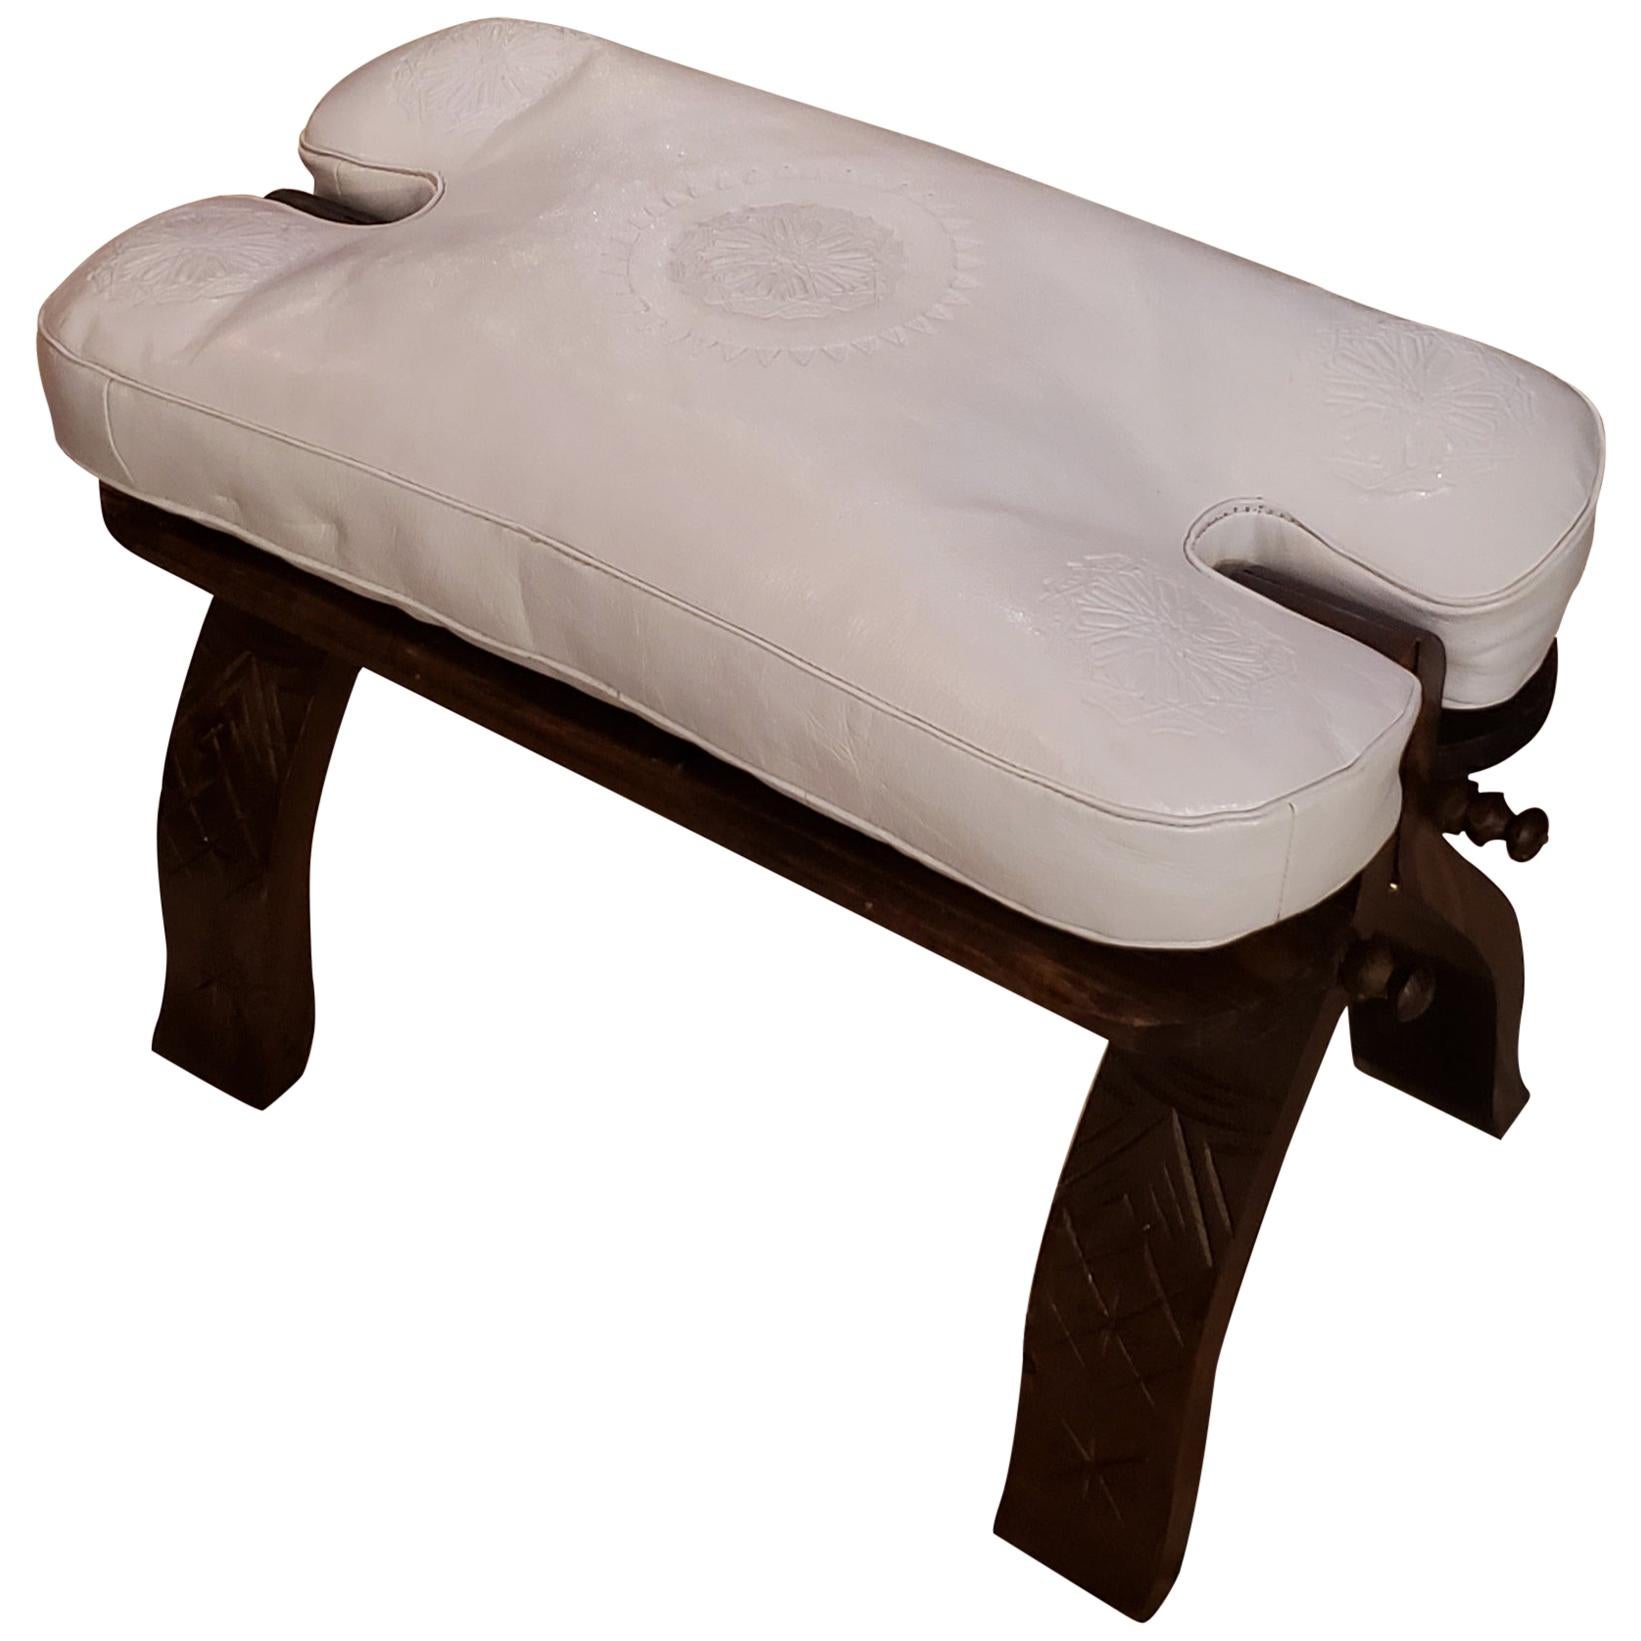 Handmade Moroccan Camel Seat, Bright White Cushion For Sale